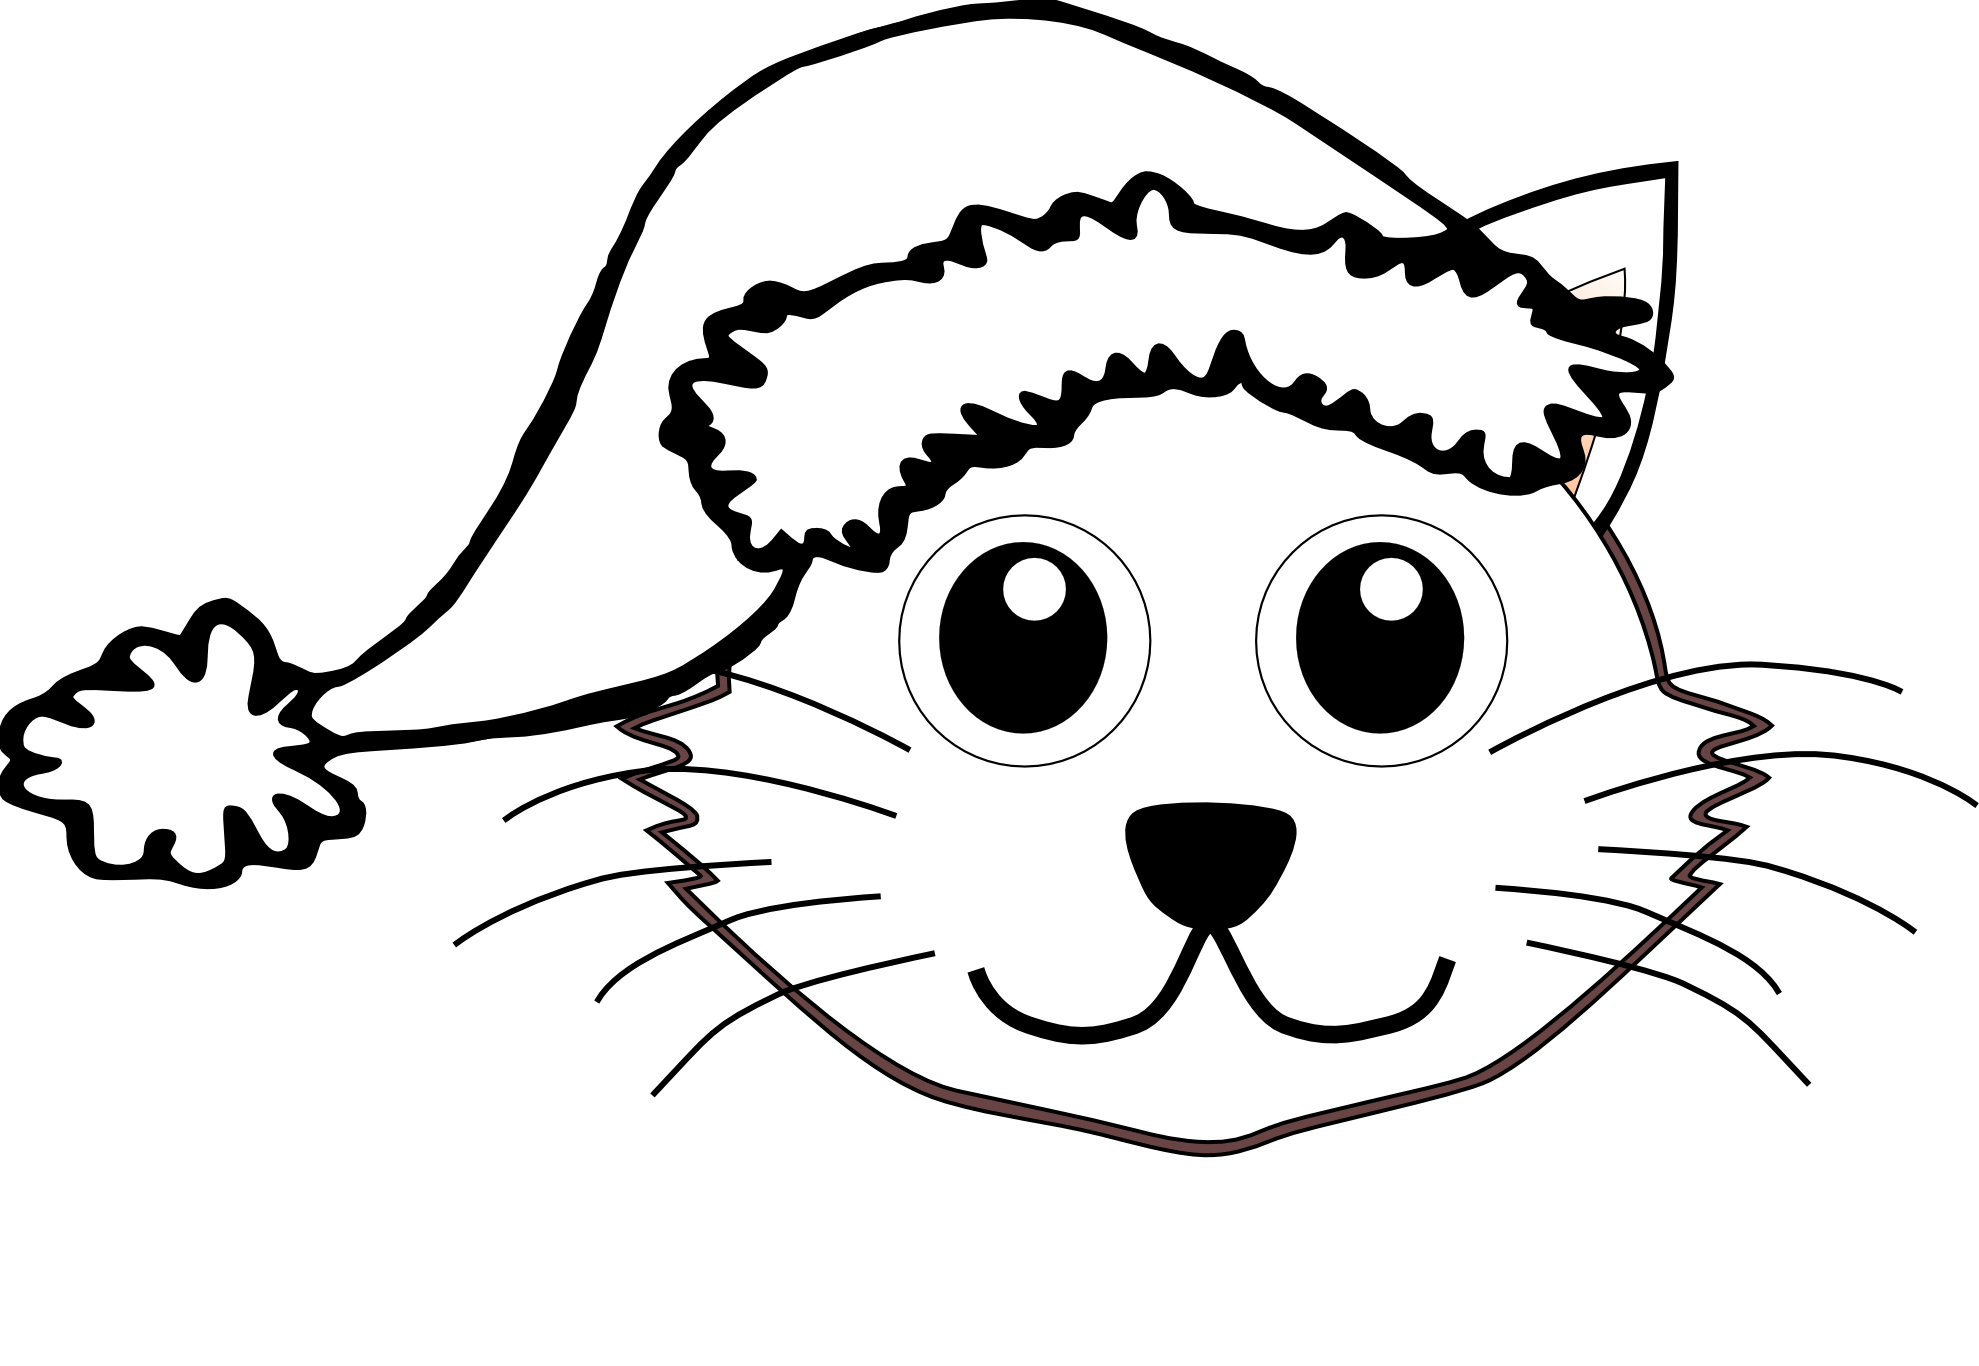 Clipart dog printable. Pirate hat black and